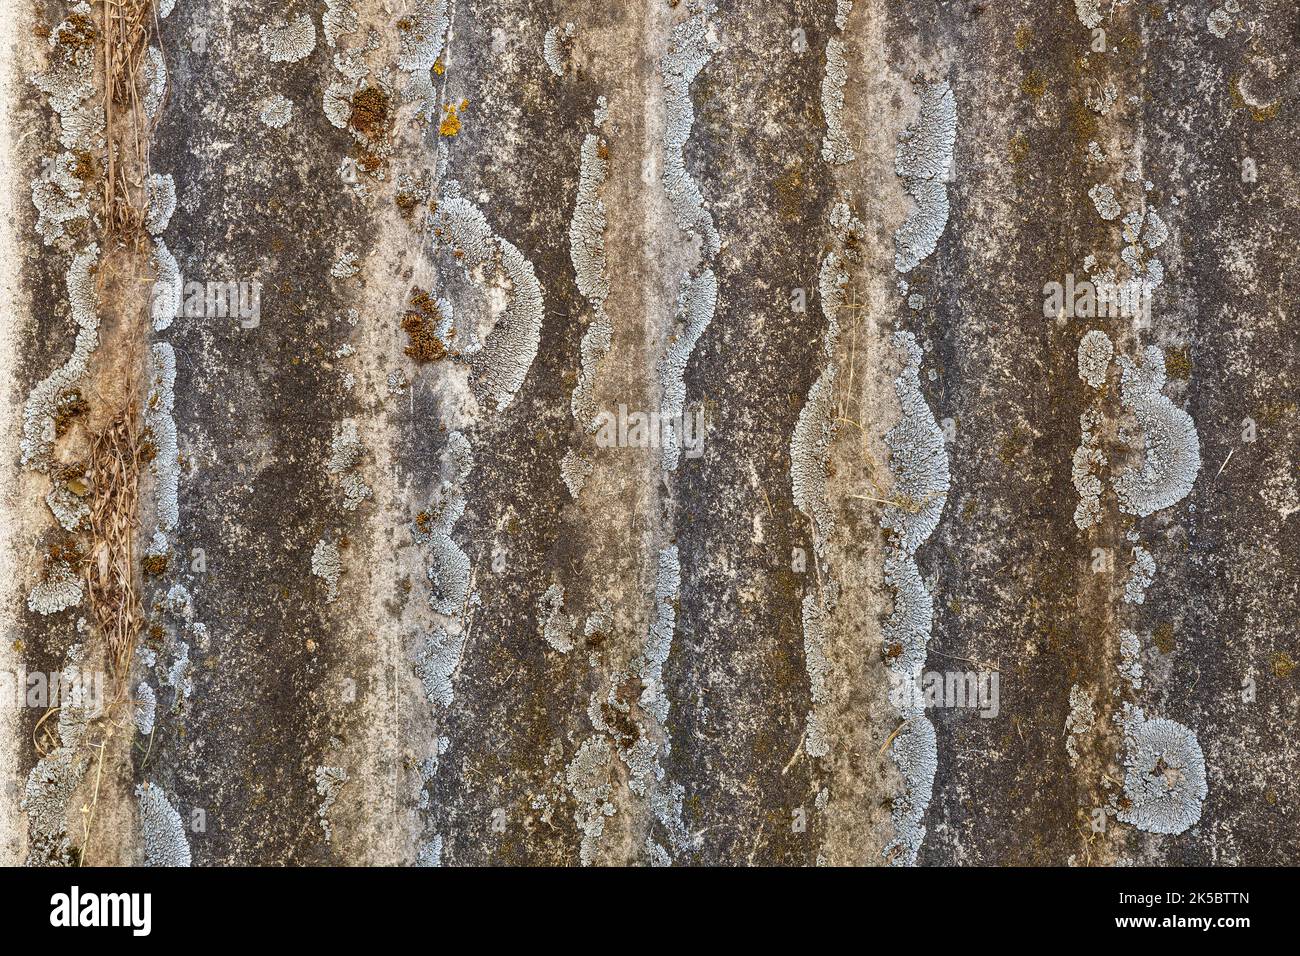 Texture of old asbestos slate covered with lichen and moss. Vintage natural background. Stock Photo